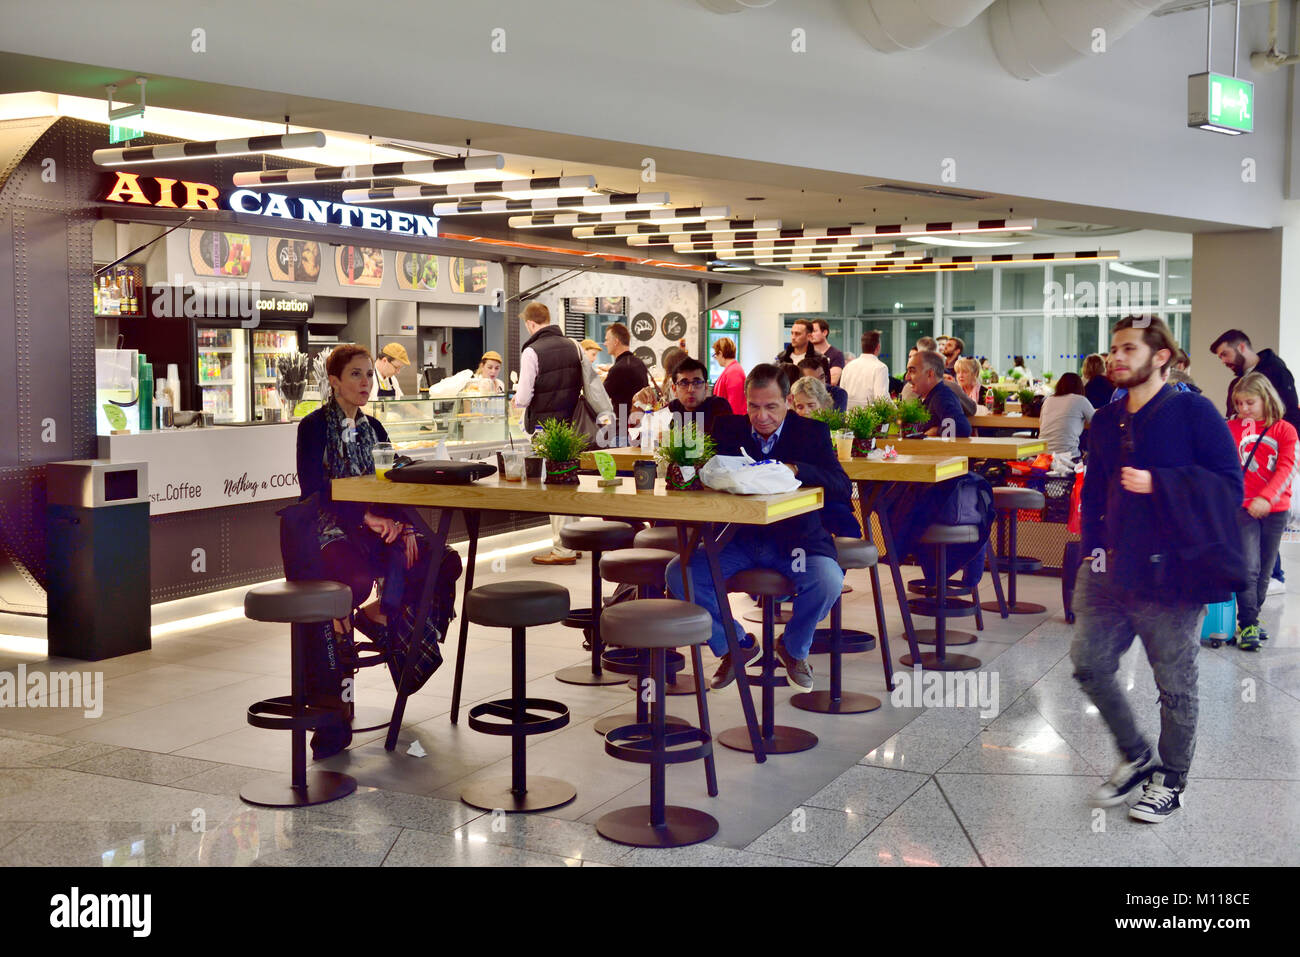 One of the restaurants (Air Canteen) inside Athens international airport, Greece Stock Photo